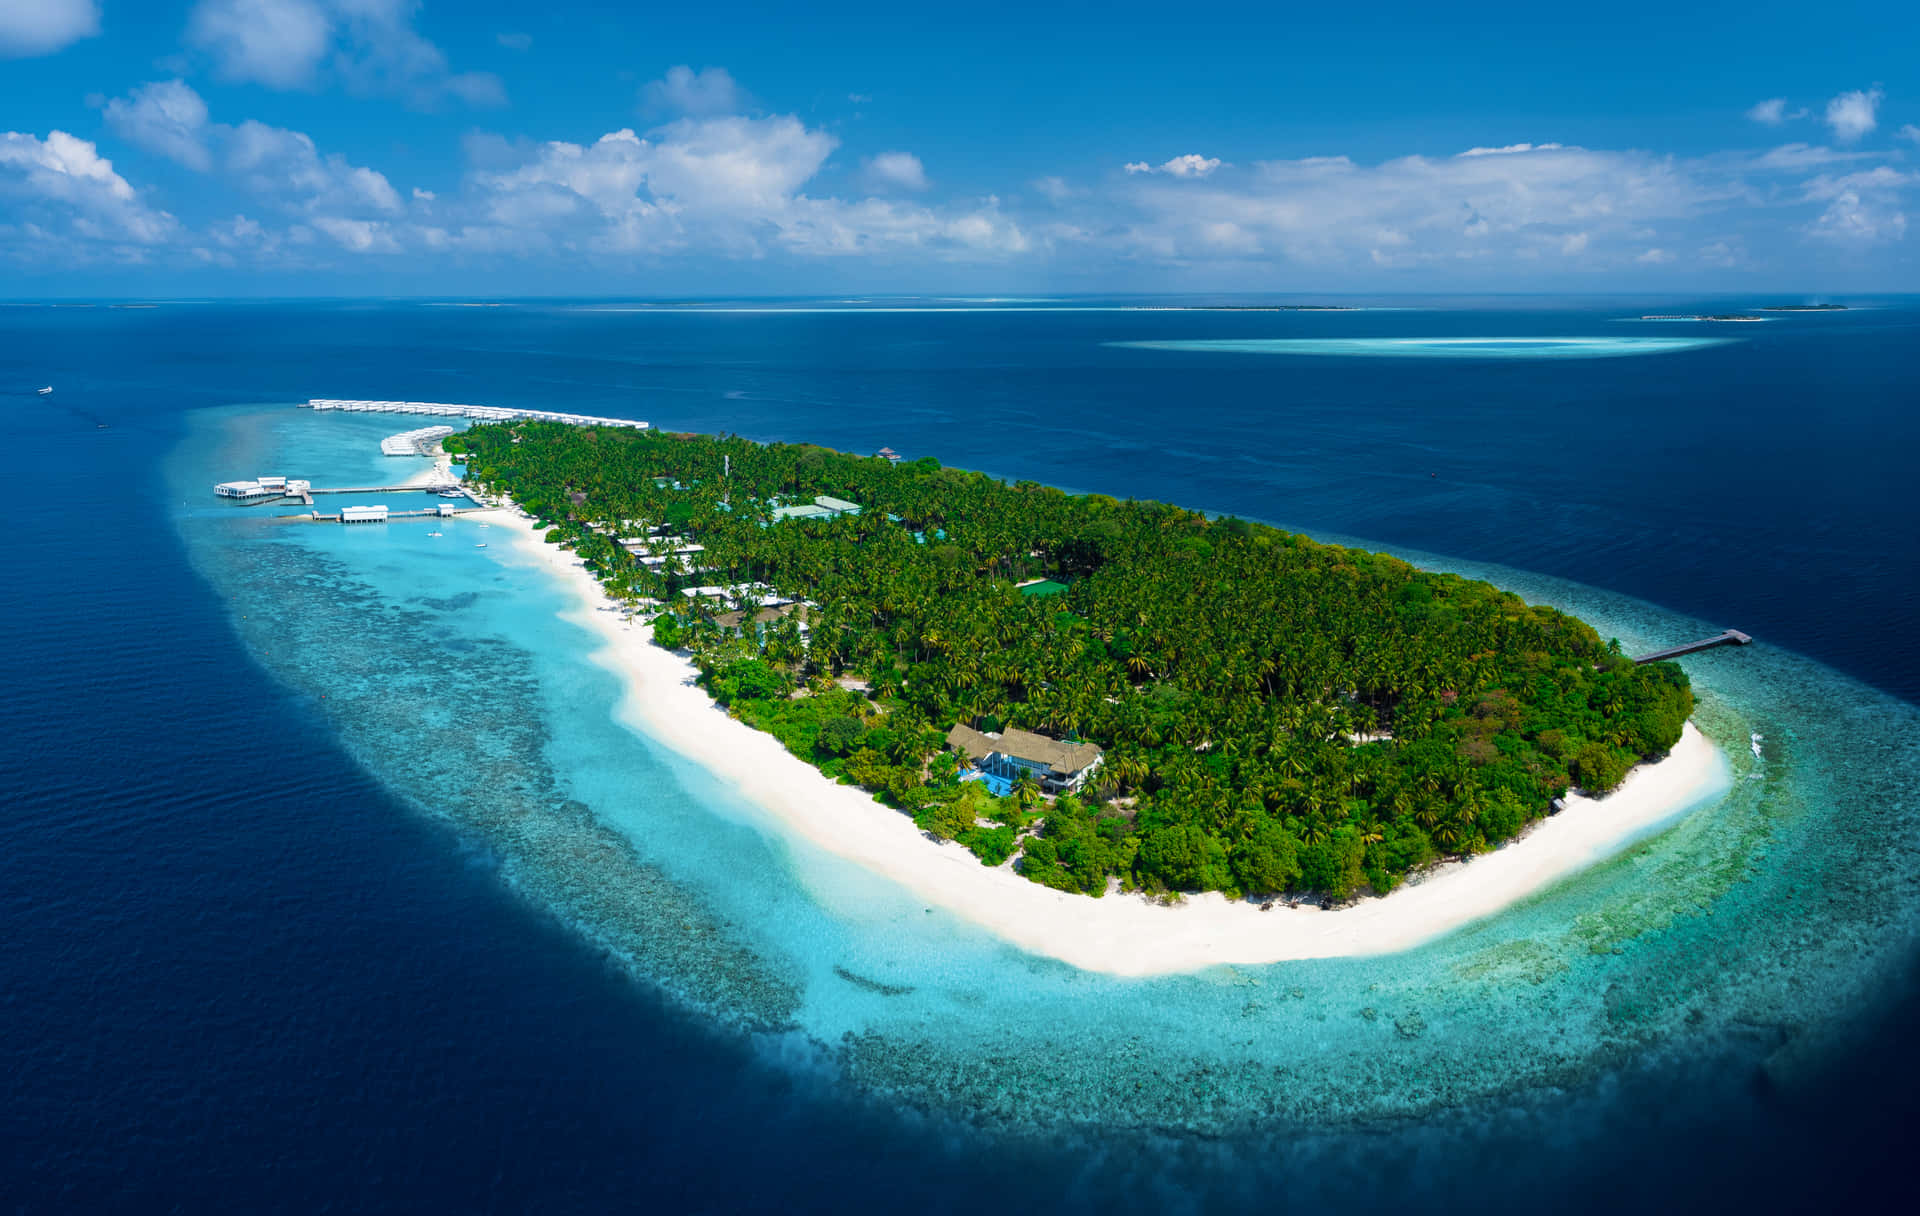 “Experience Unrivaled Relaxation in the Luxurious Maldives!”